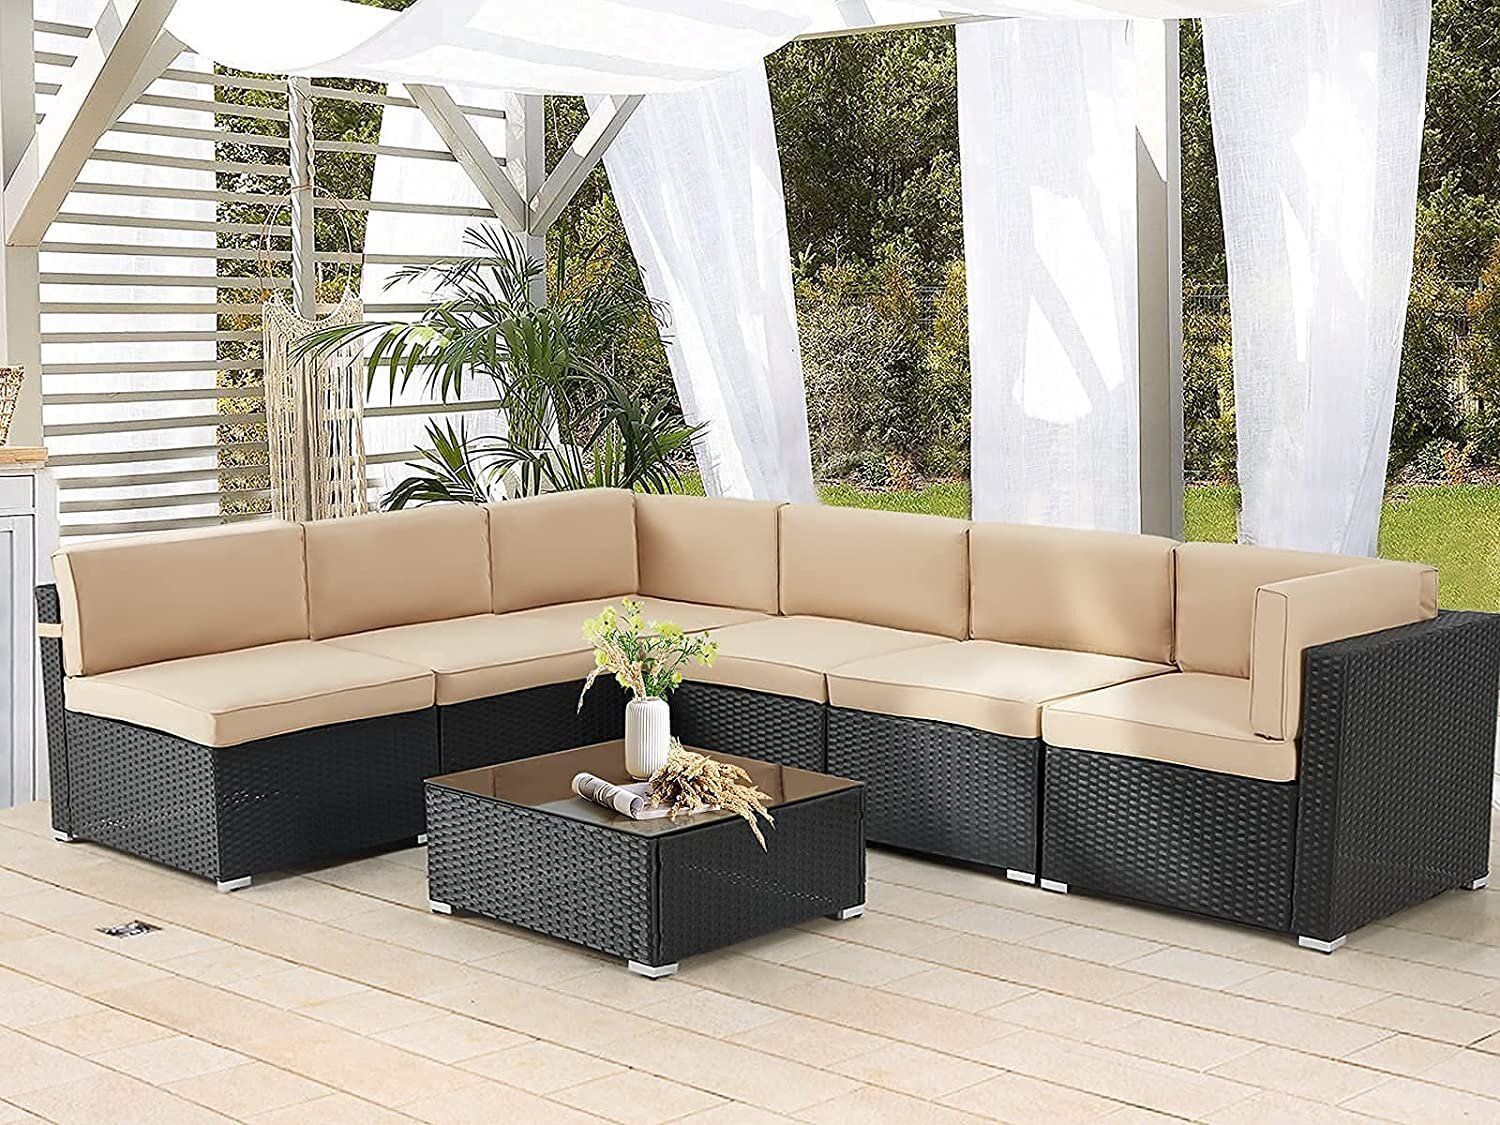 Ebern Designs Emilienne 7 Piece Rattan Sectional Seating Group With  Cushions & Reviews | Wayfair For 7 Piece Rattan Sectional Sofa Set (Photo 12 of 15)